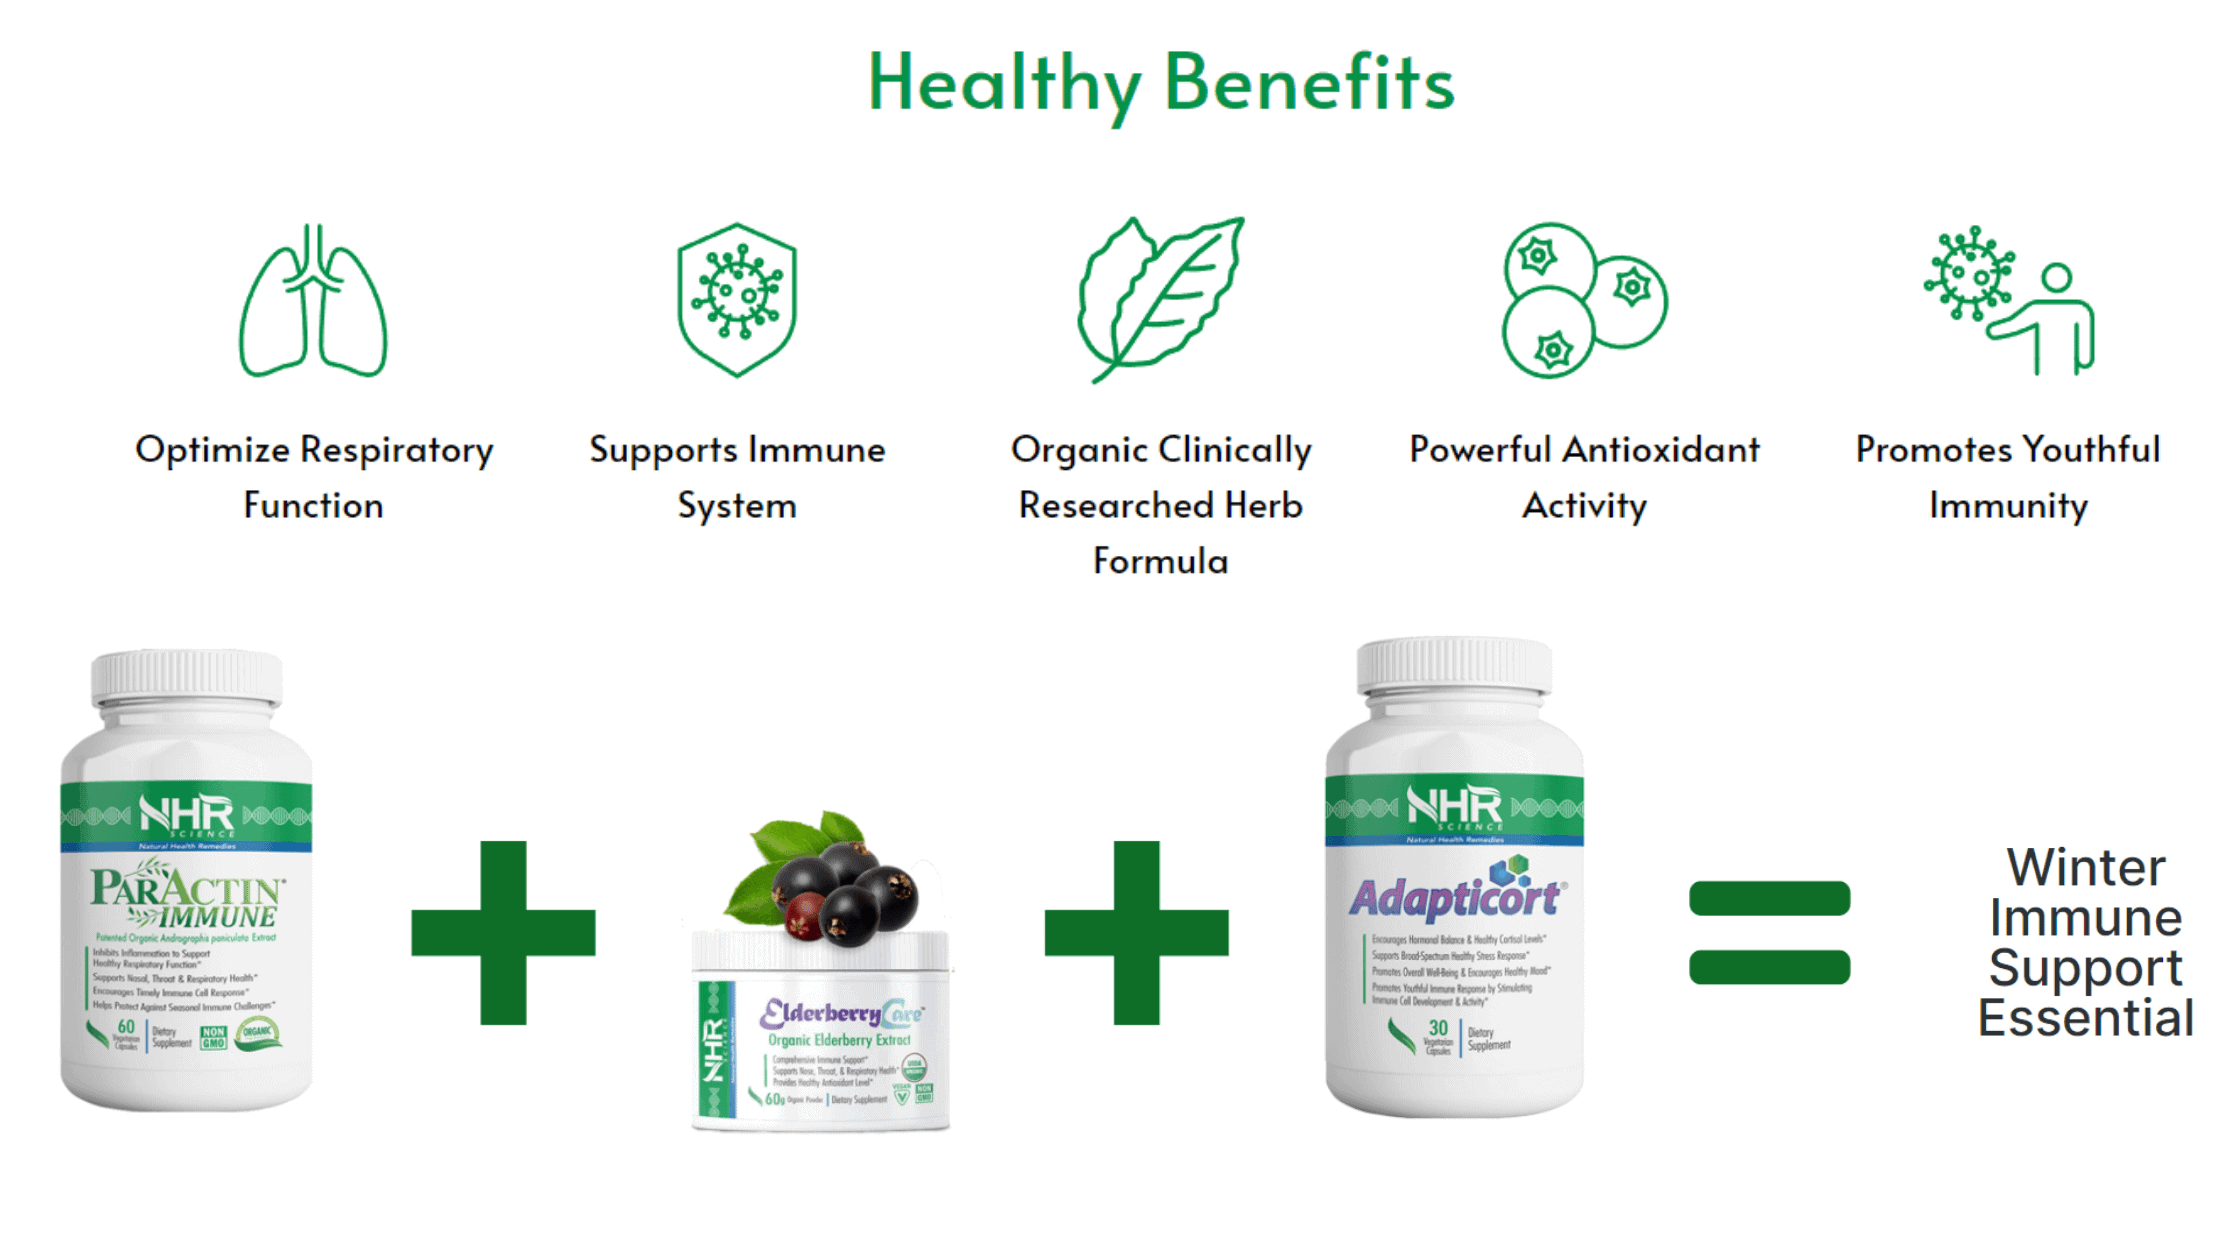 NHR Science Advanced Immune Support Benefits